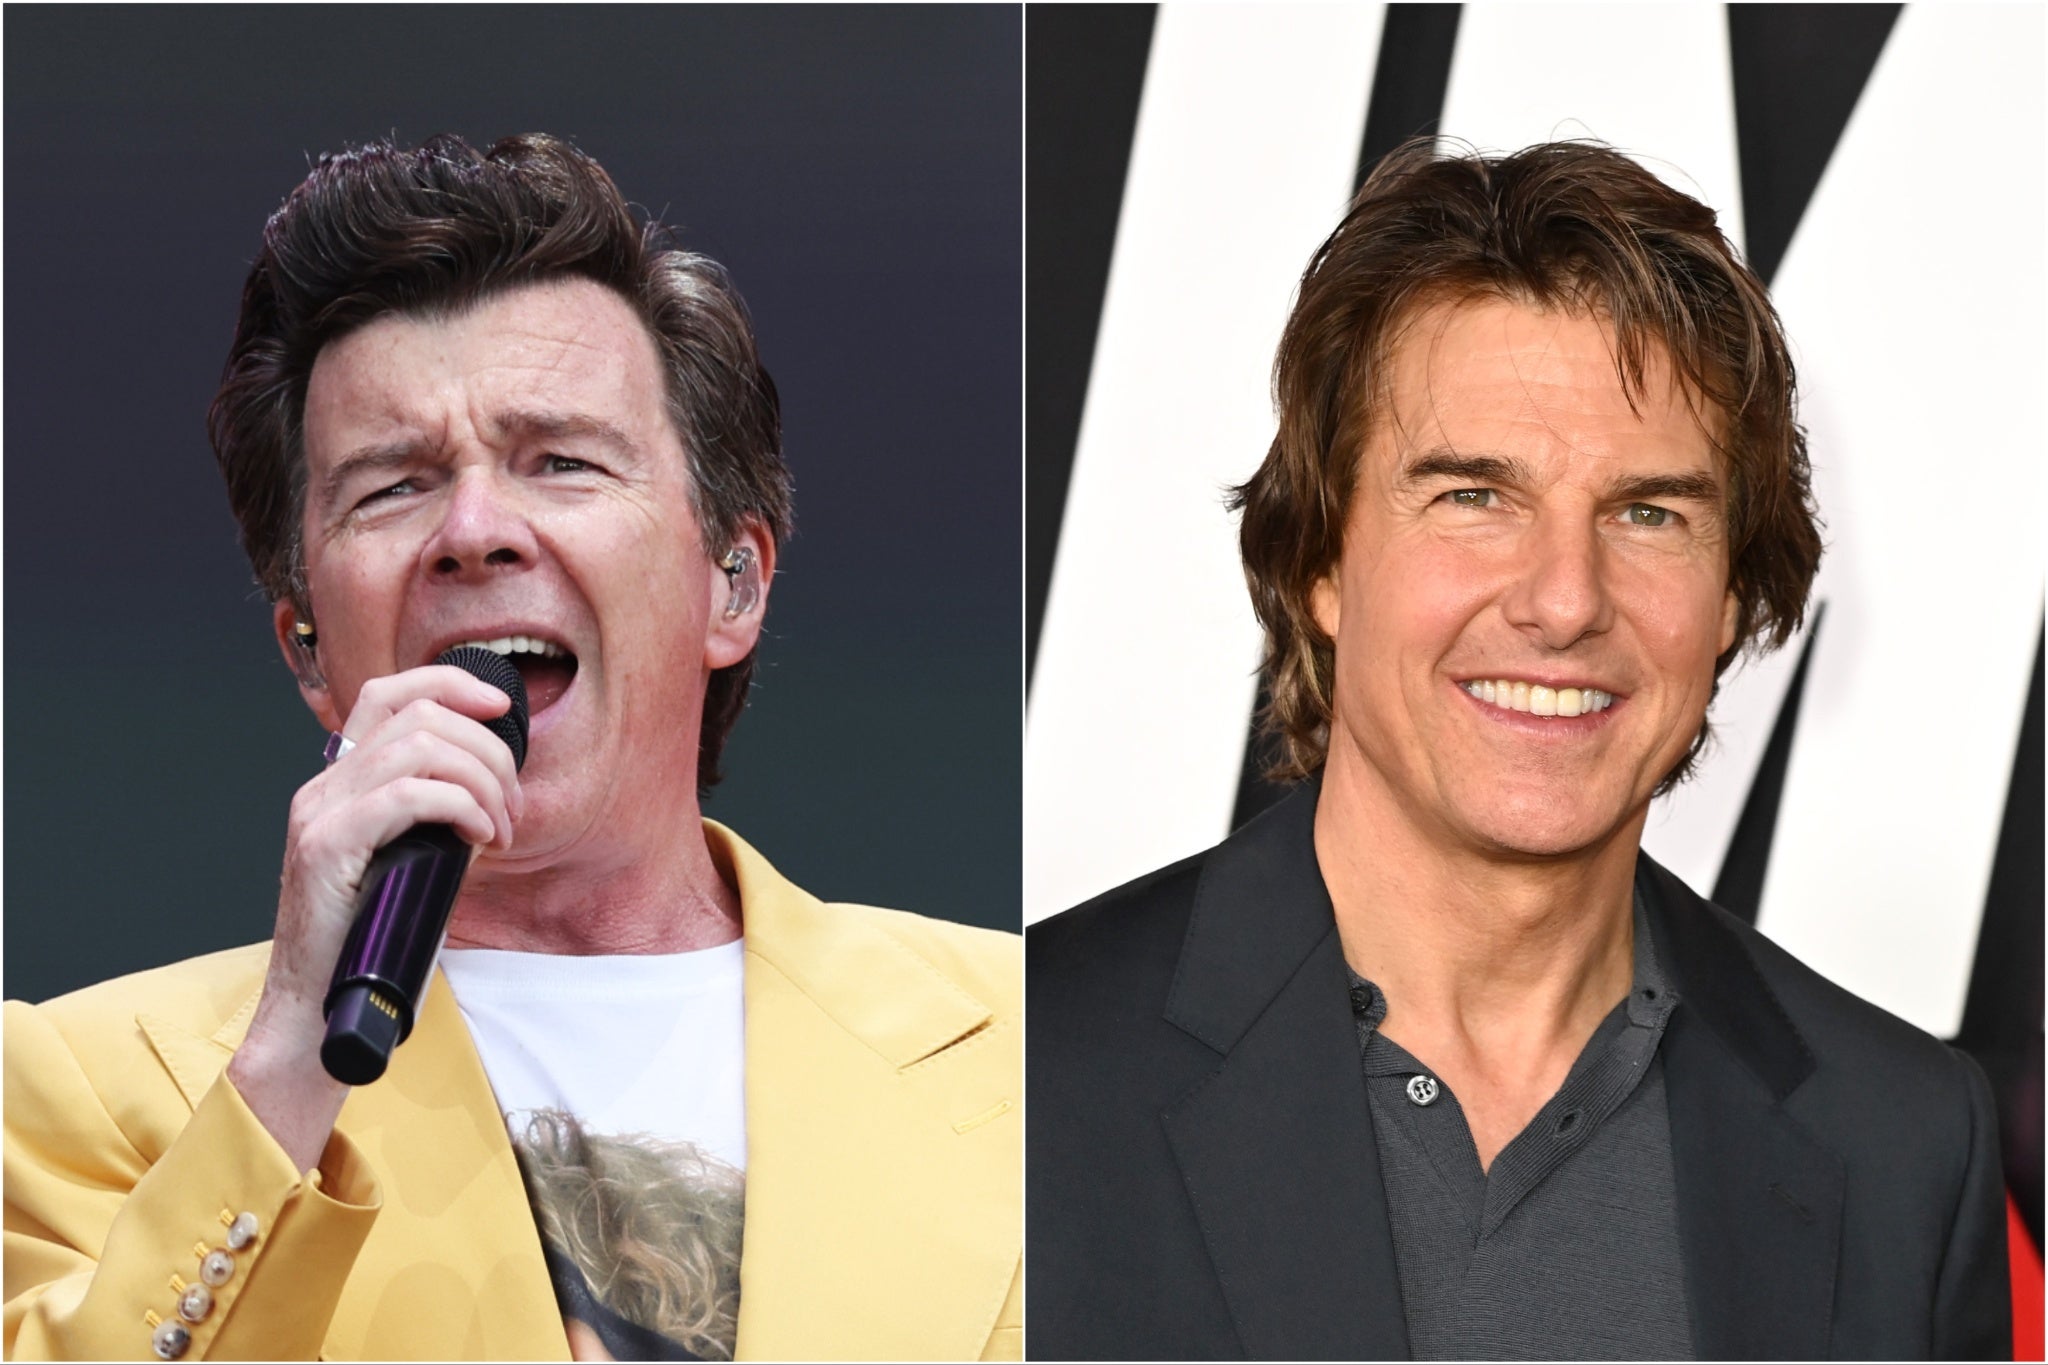 Rick Astley (left) and Tom Cruise